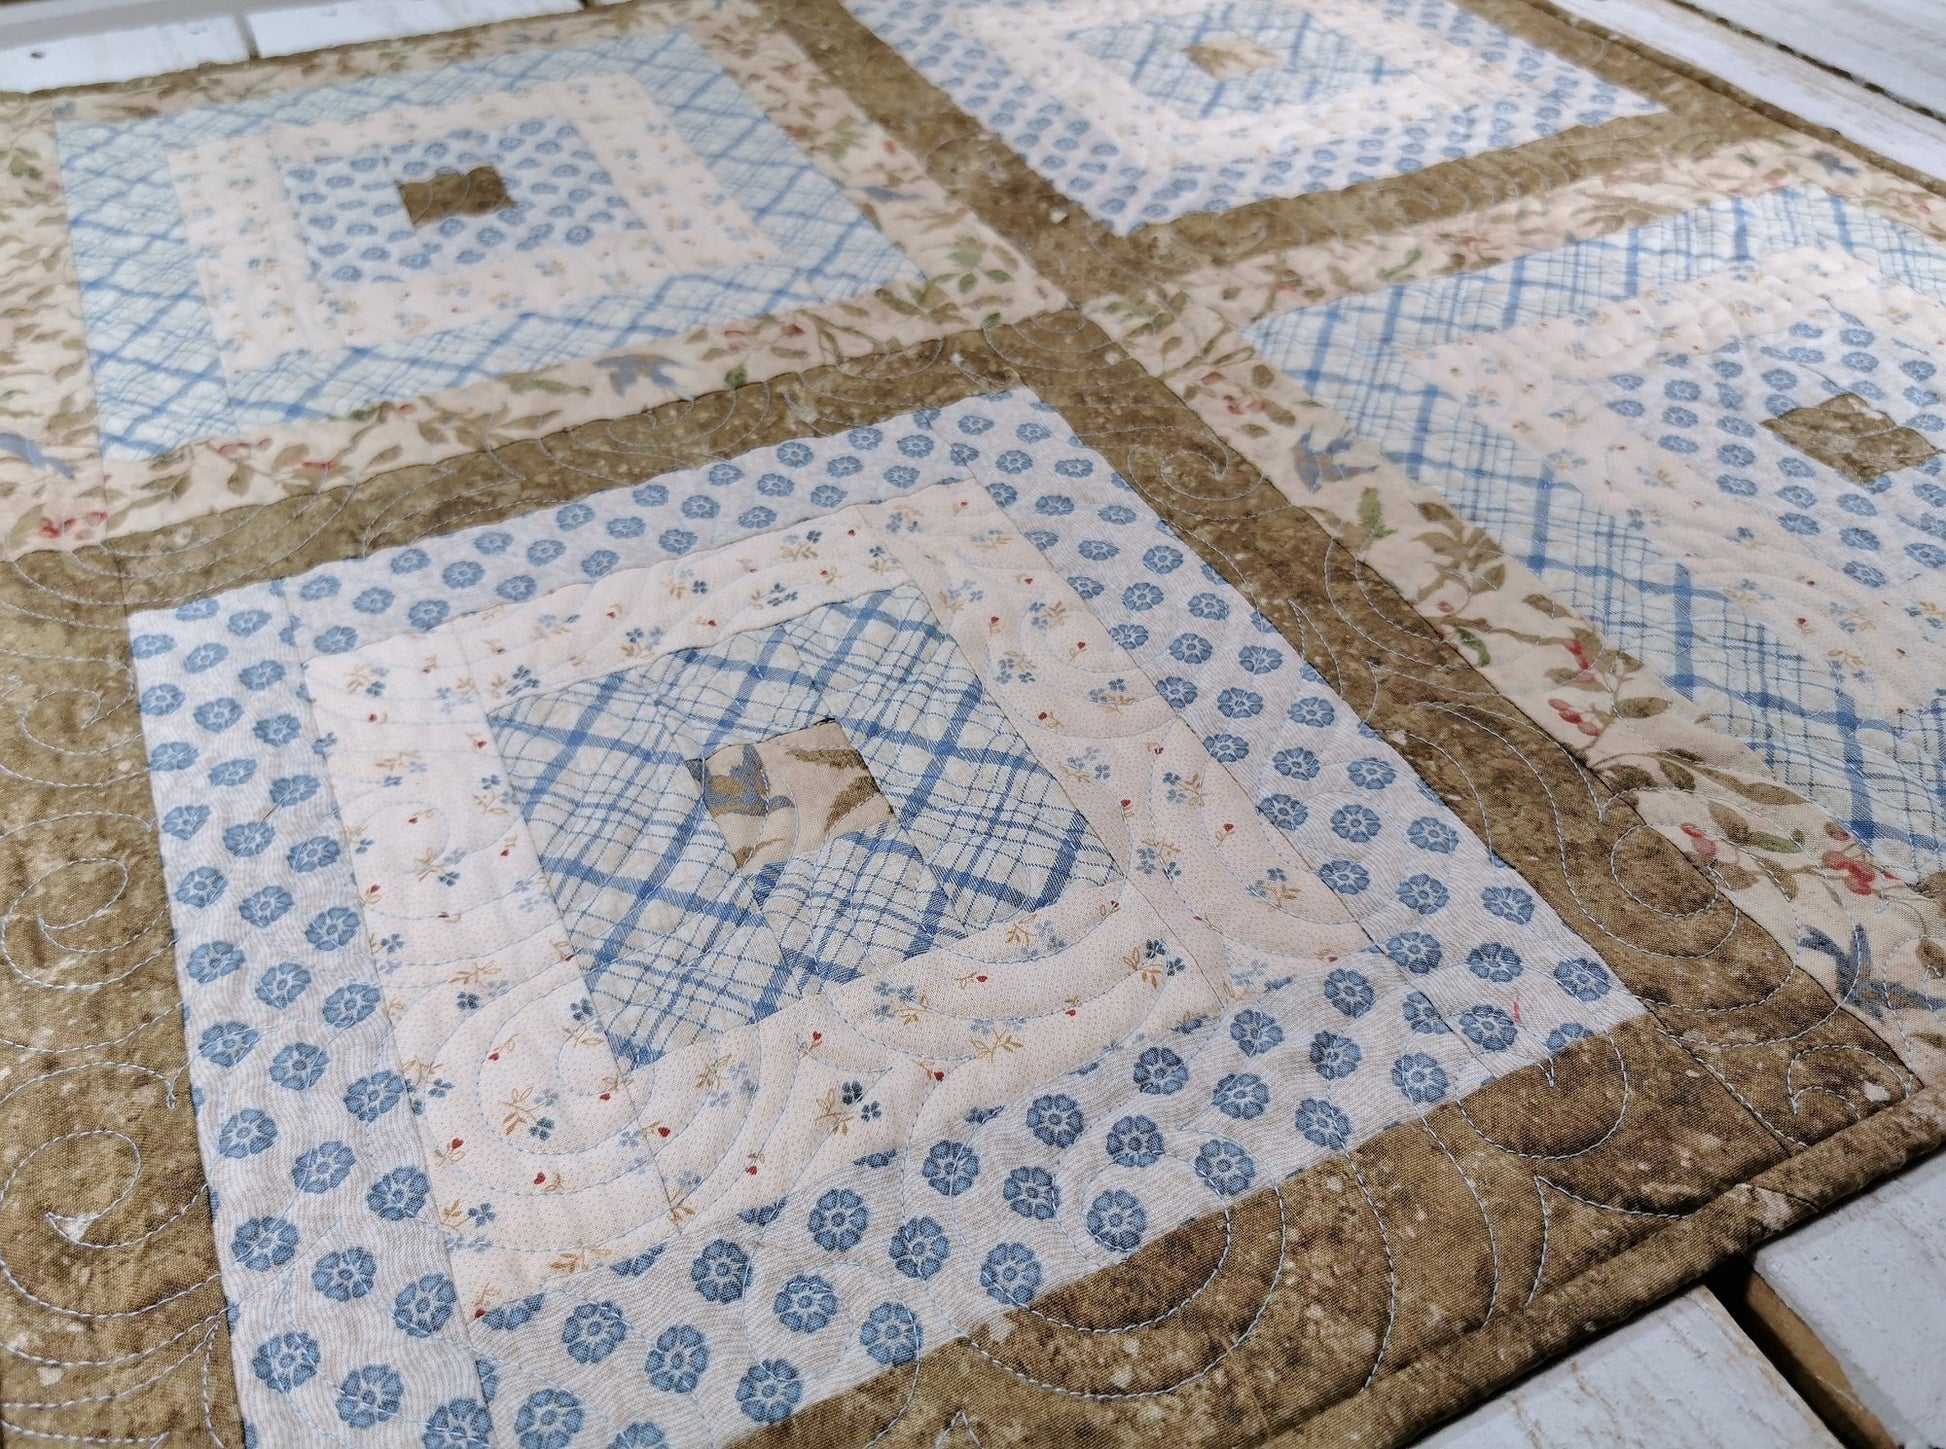 Angle view of the square table topper showing a close up of the blue and beige fabrics used